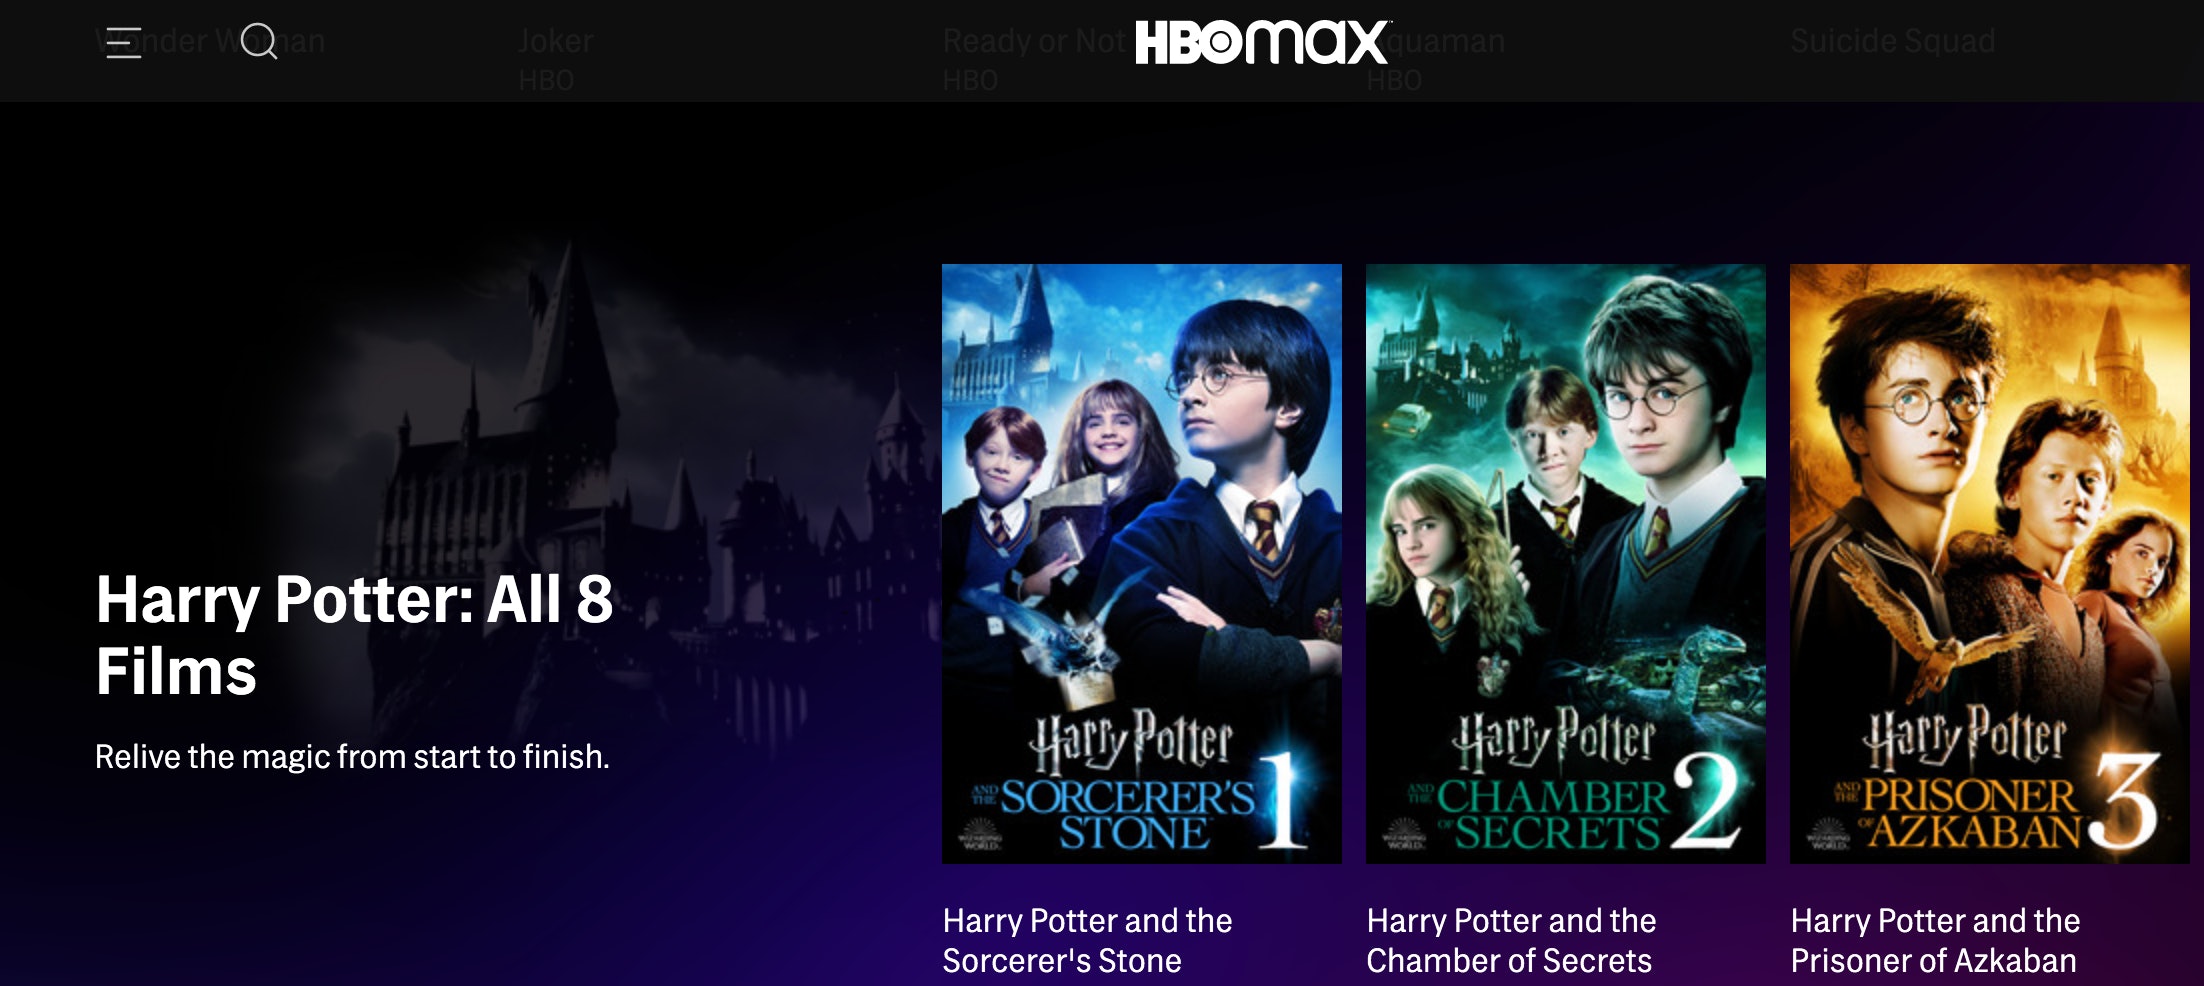 do i have to watch all harry potter movies